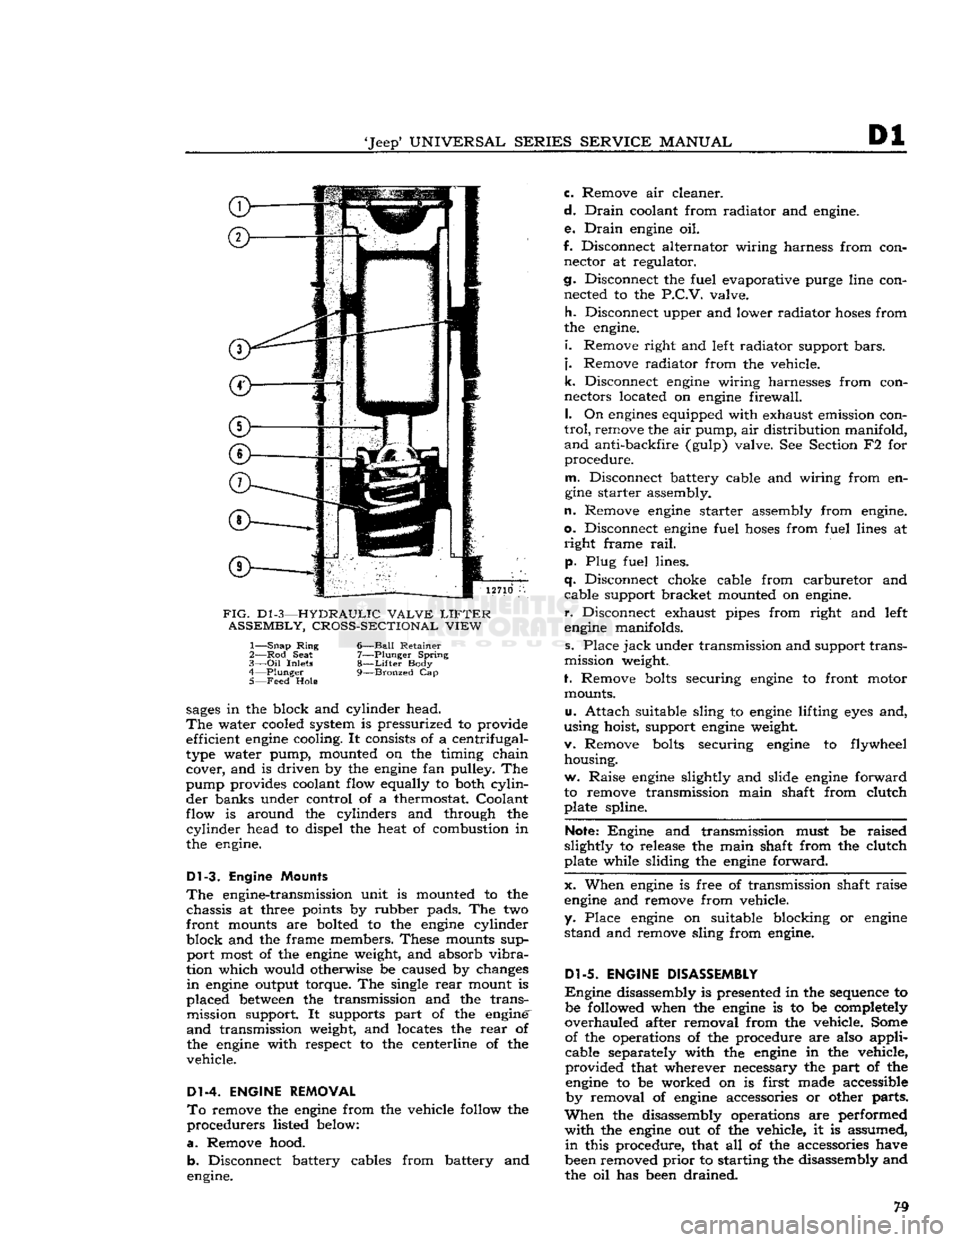 JEEP CJ 1953 Manual PDF 
Jeep*
 UNIVERSAL SERIES SERVICE
 MANUAL 

Dl 

12710 

FIG.
 D1
 -3—HYDRAULIC VALVE
 LIFTER 
 ASSEMBLY, CROSS-SECTIONAL VIEW 
1—
 Snap
 Ring
 6—Ball Retainer 

2— Rod
 Seat
 7—Plunger Spri